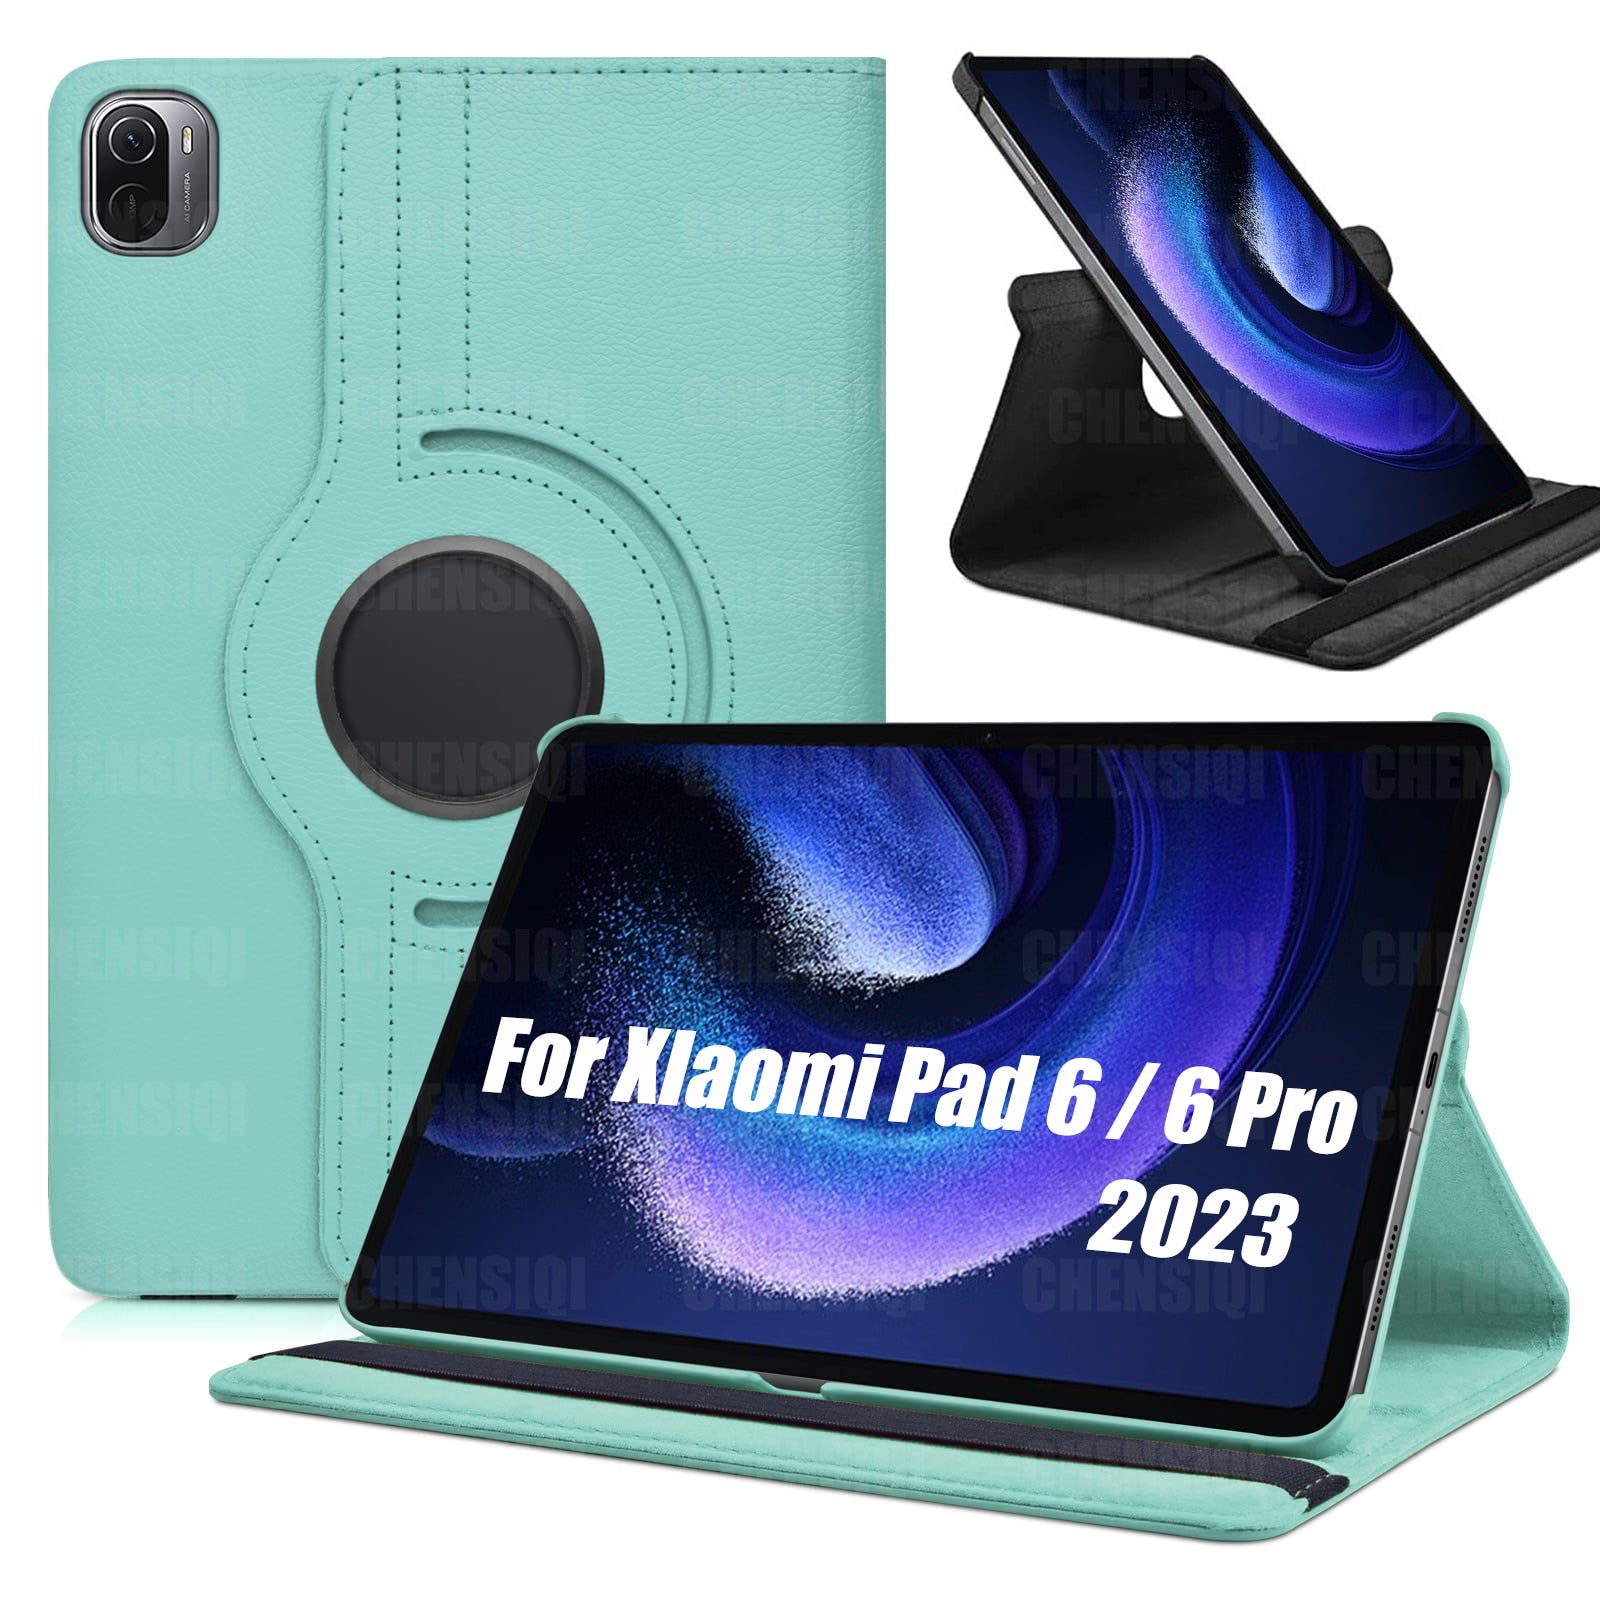 Case for Xiaomi Pad 6/Mi Pad 6 Pro 11" Tablet 2023 Leather Protective Case with Sleep/Wake Function and 360 Rotating Stand Case